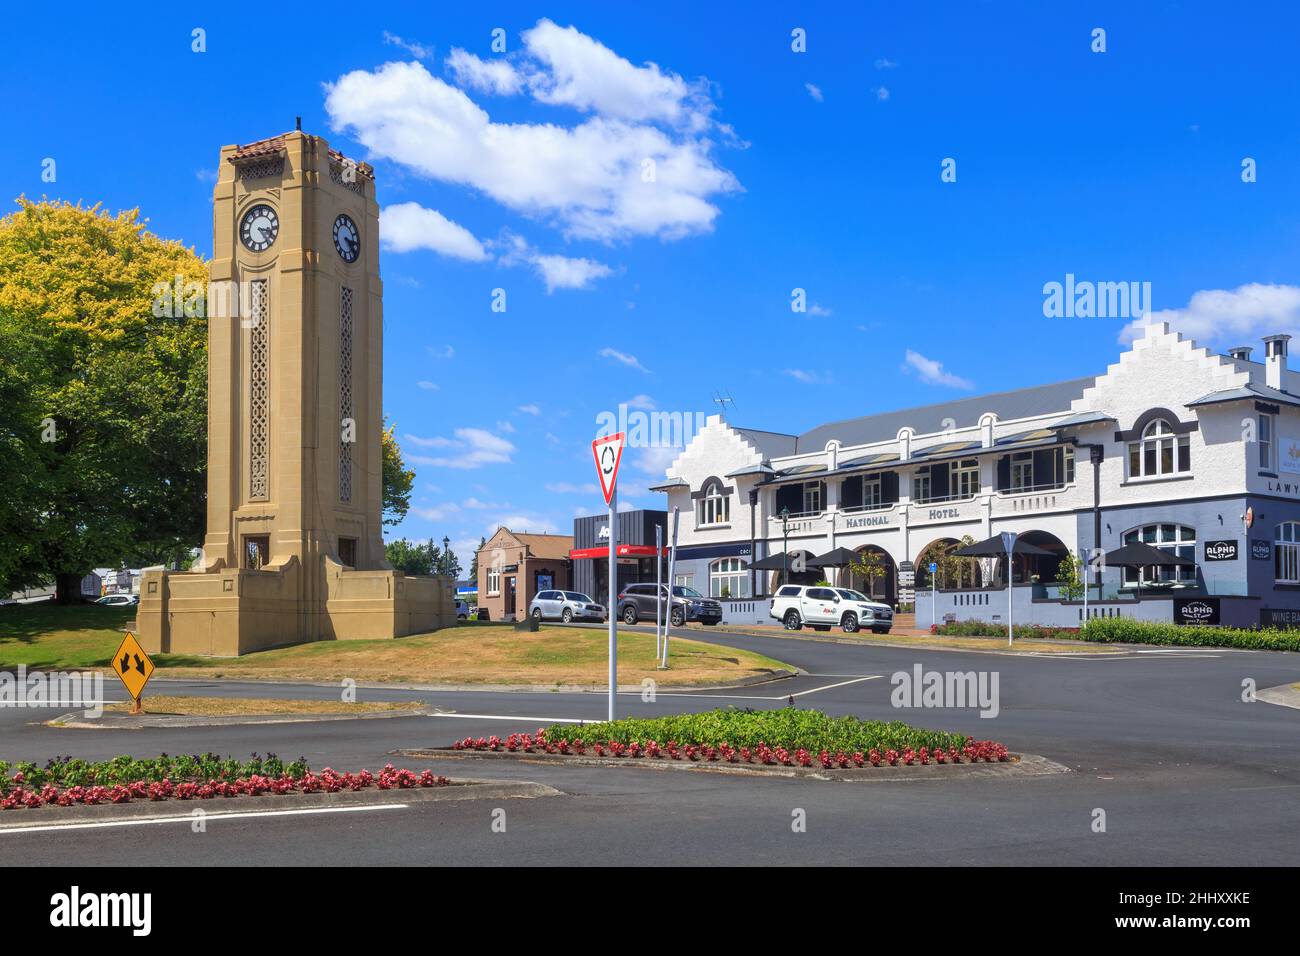 Cambridge, New Zealand. The town's clock tower, built 1934, and the National Hotel, built 1912 Stock Photo